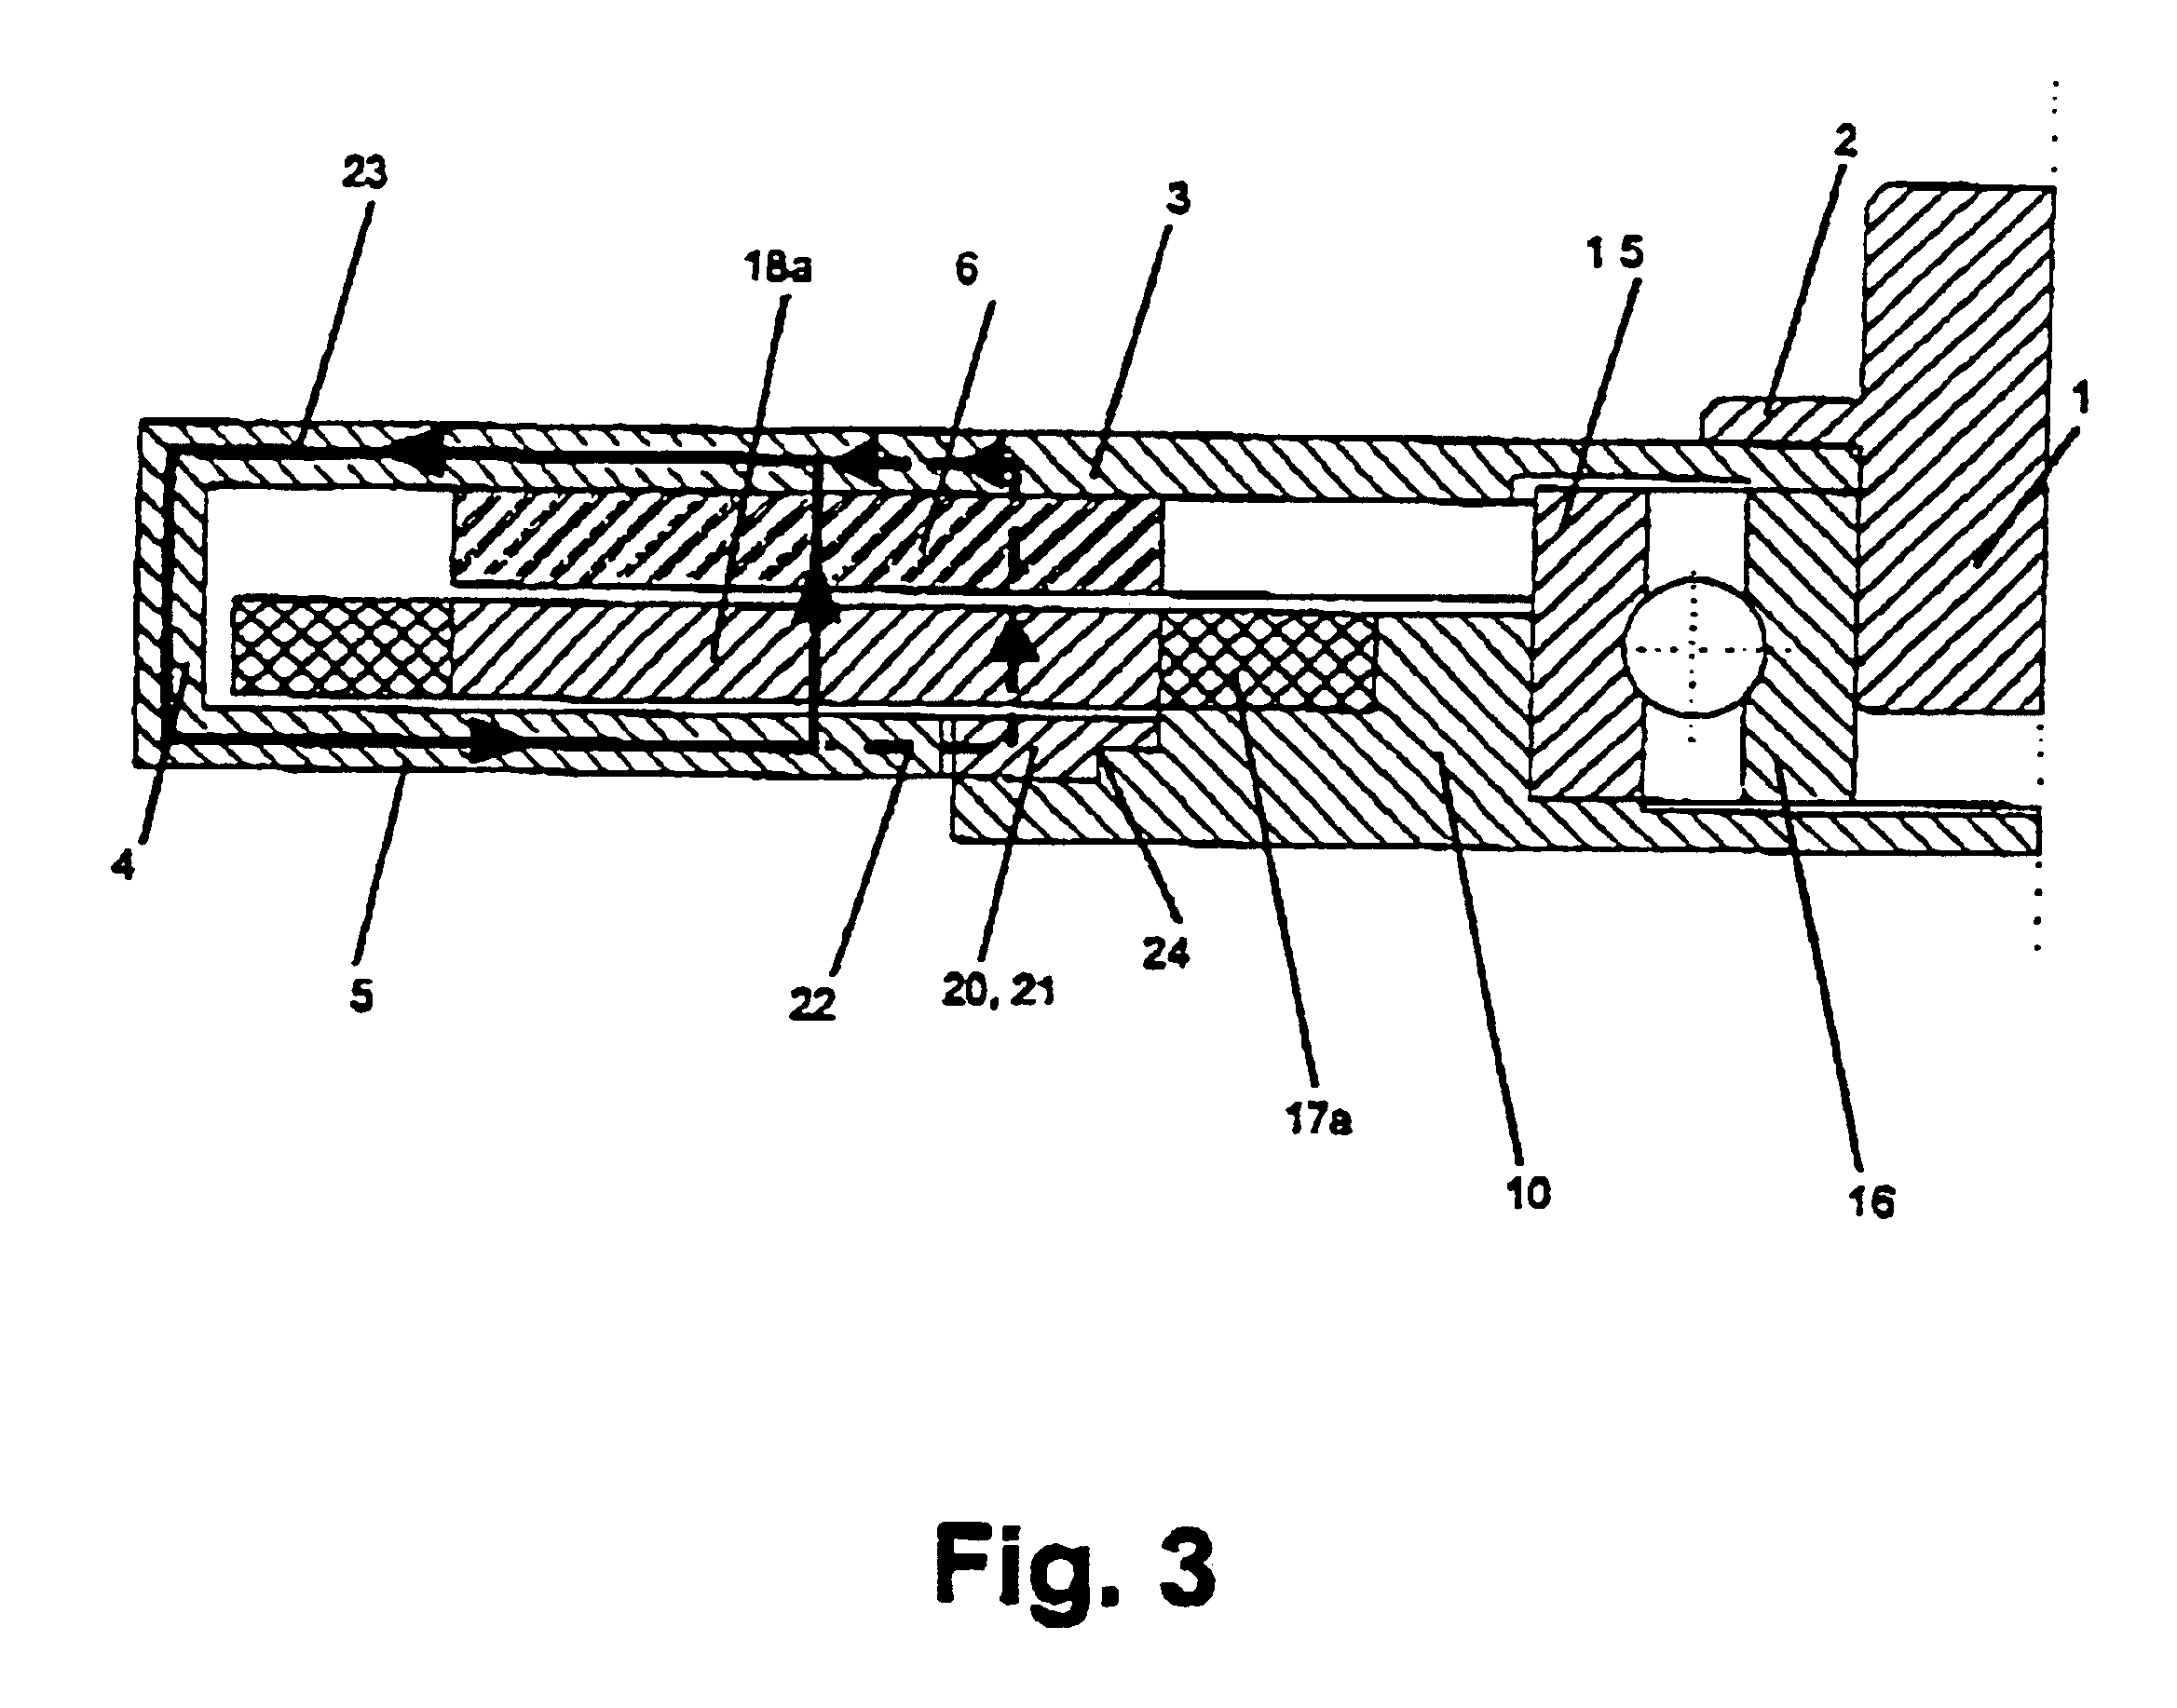 Disk motor with bearing prestressing feature